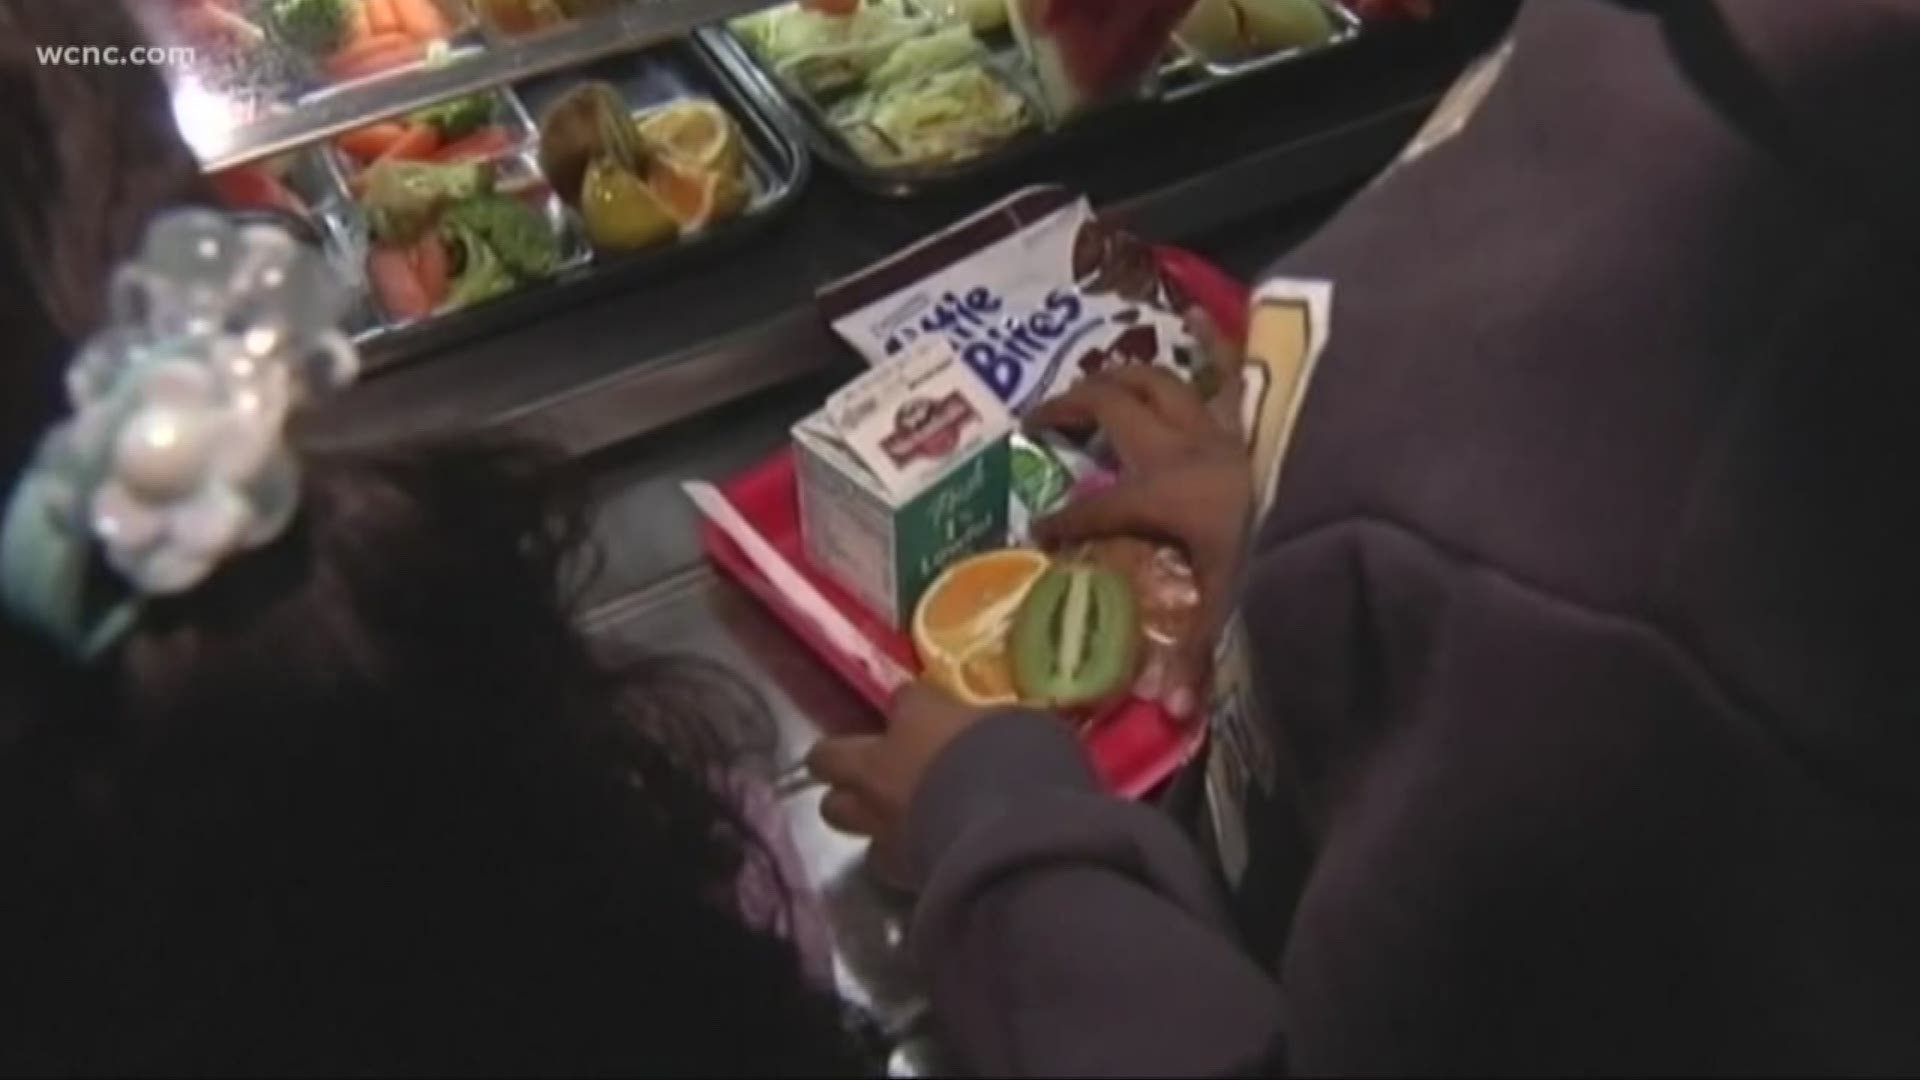 Parents will now have to spend an extra 50 cents for every lunch.